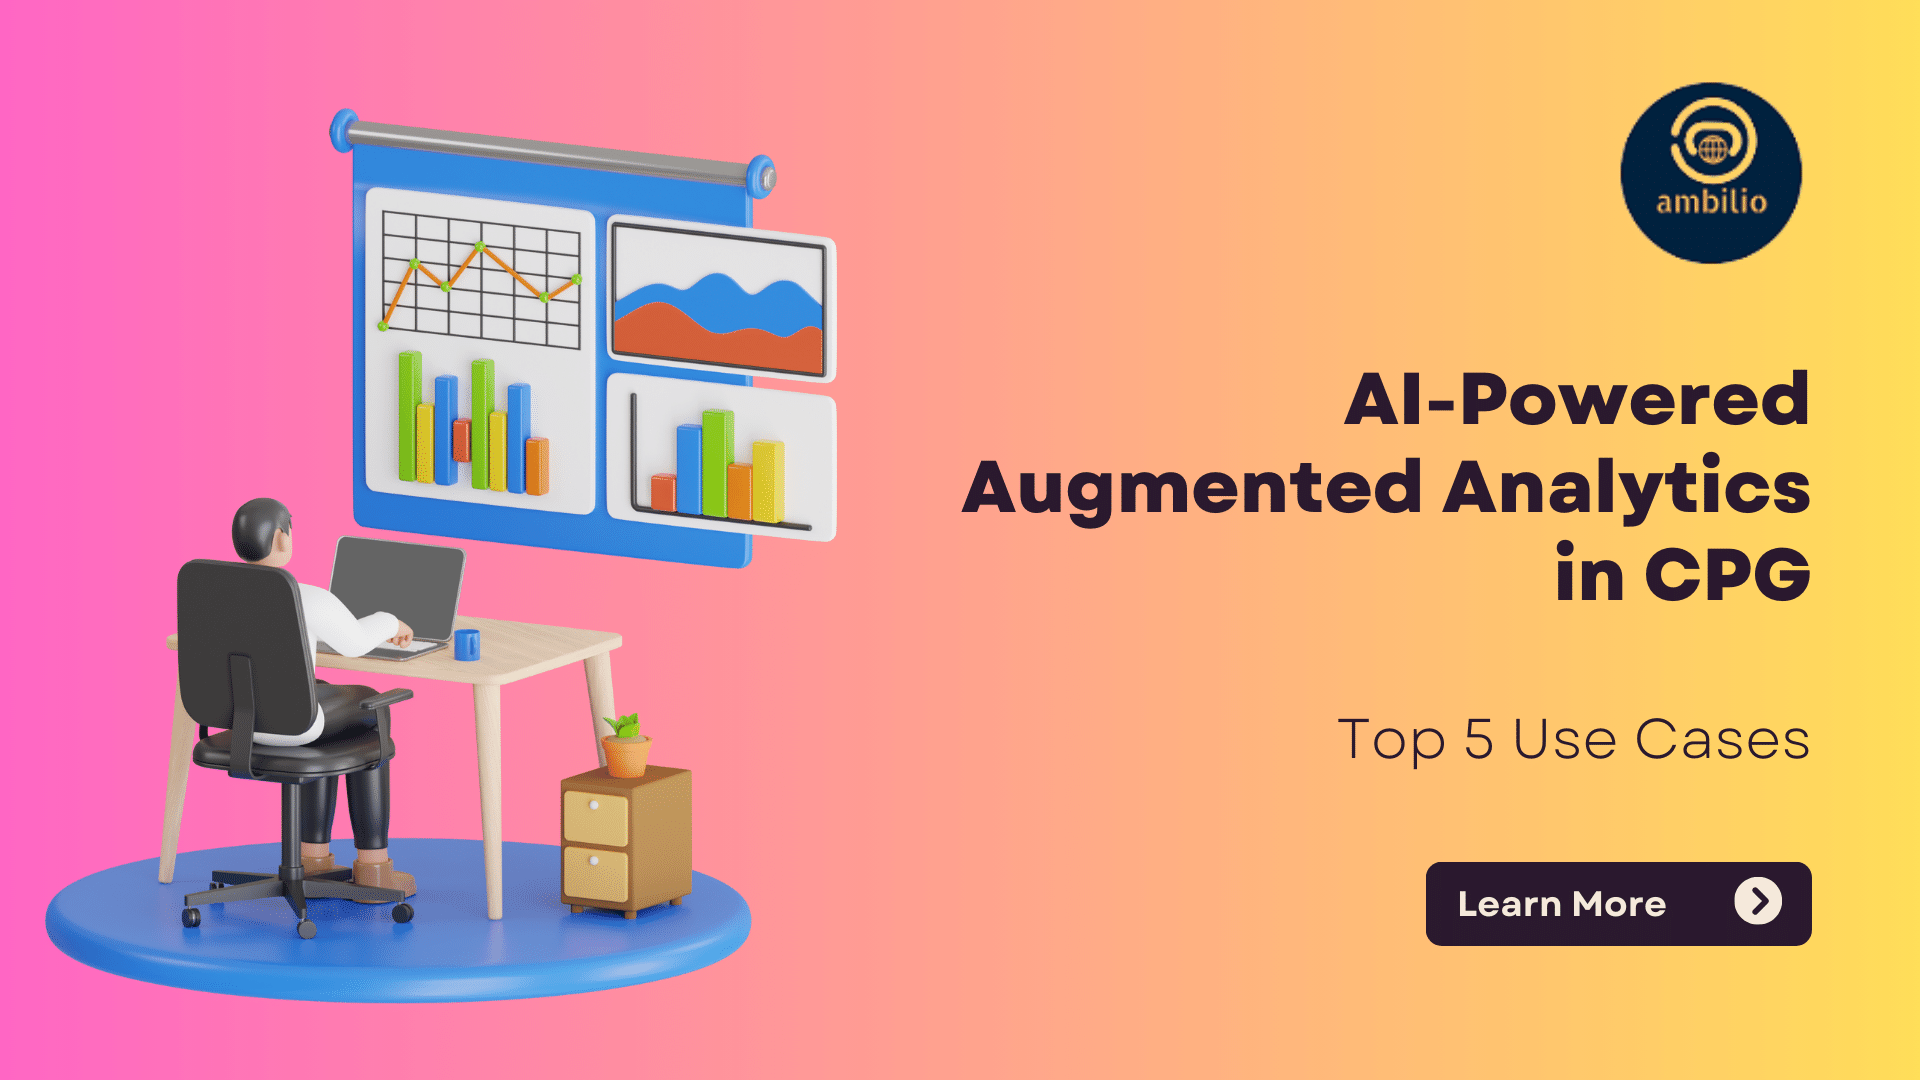 Top 5 Use Cases of AI-Powered Augmented Analytics in CPG